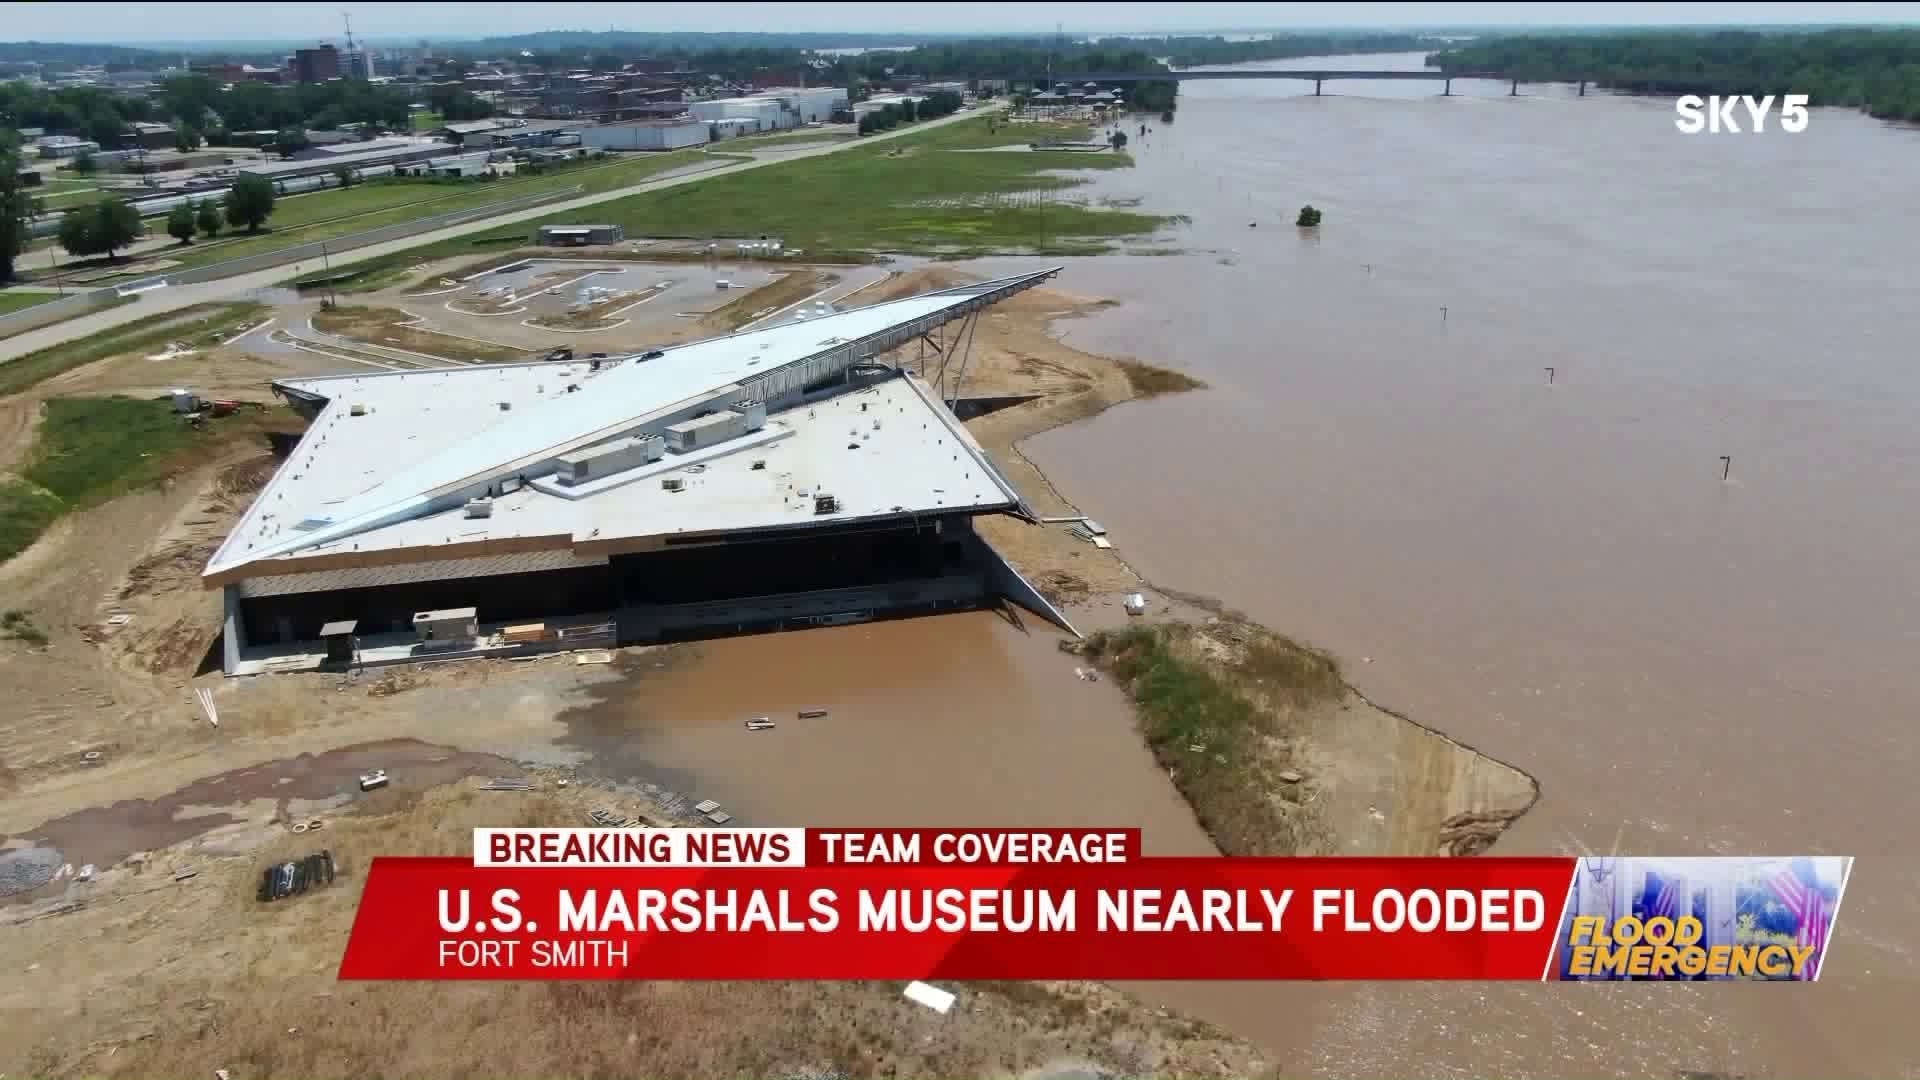 U.S. Marshals Museum Nearly Flooded